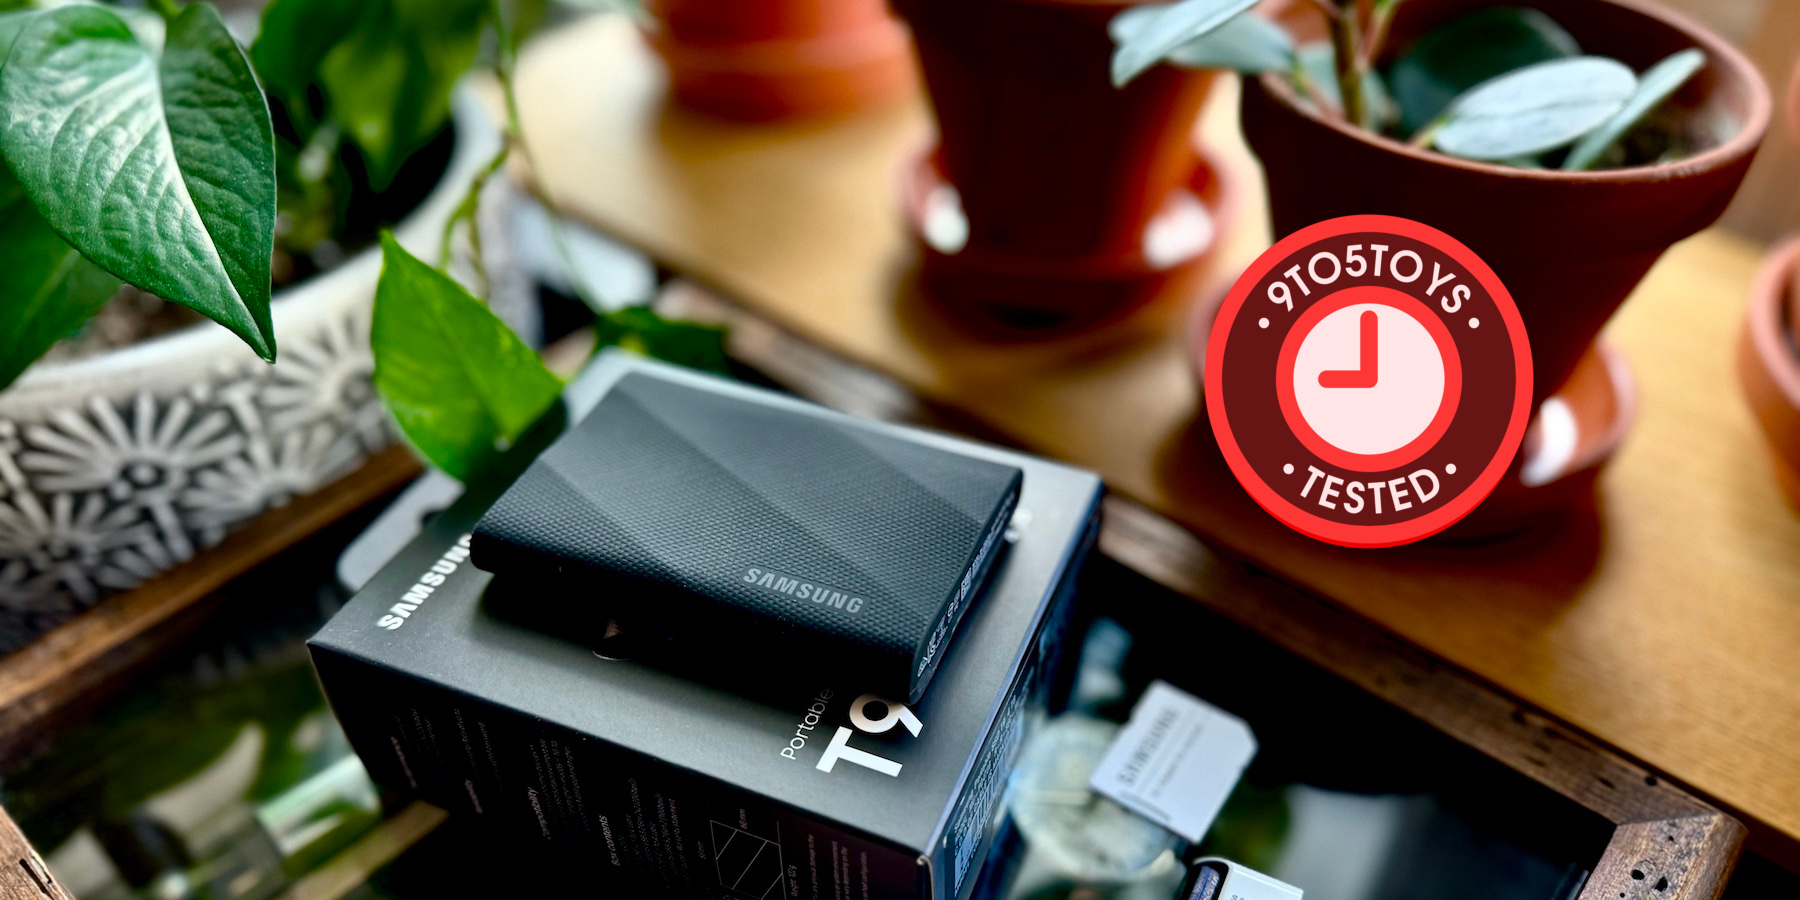 Crucial launches 4TB portable SSD at under $400 - 9to5Toys